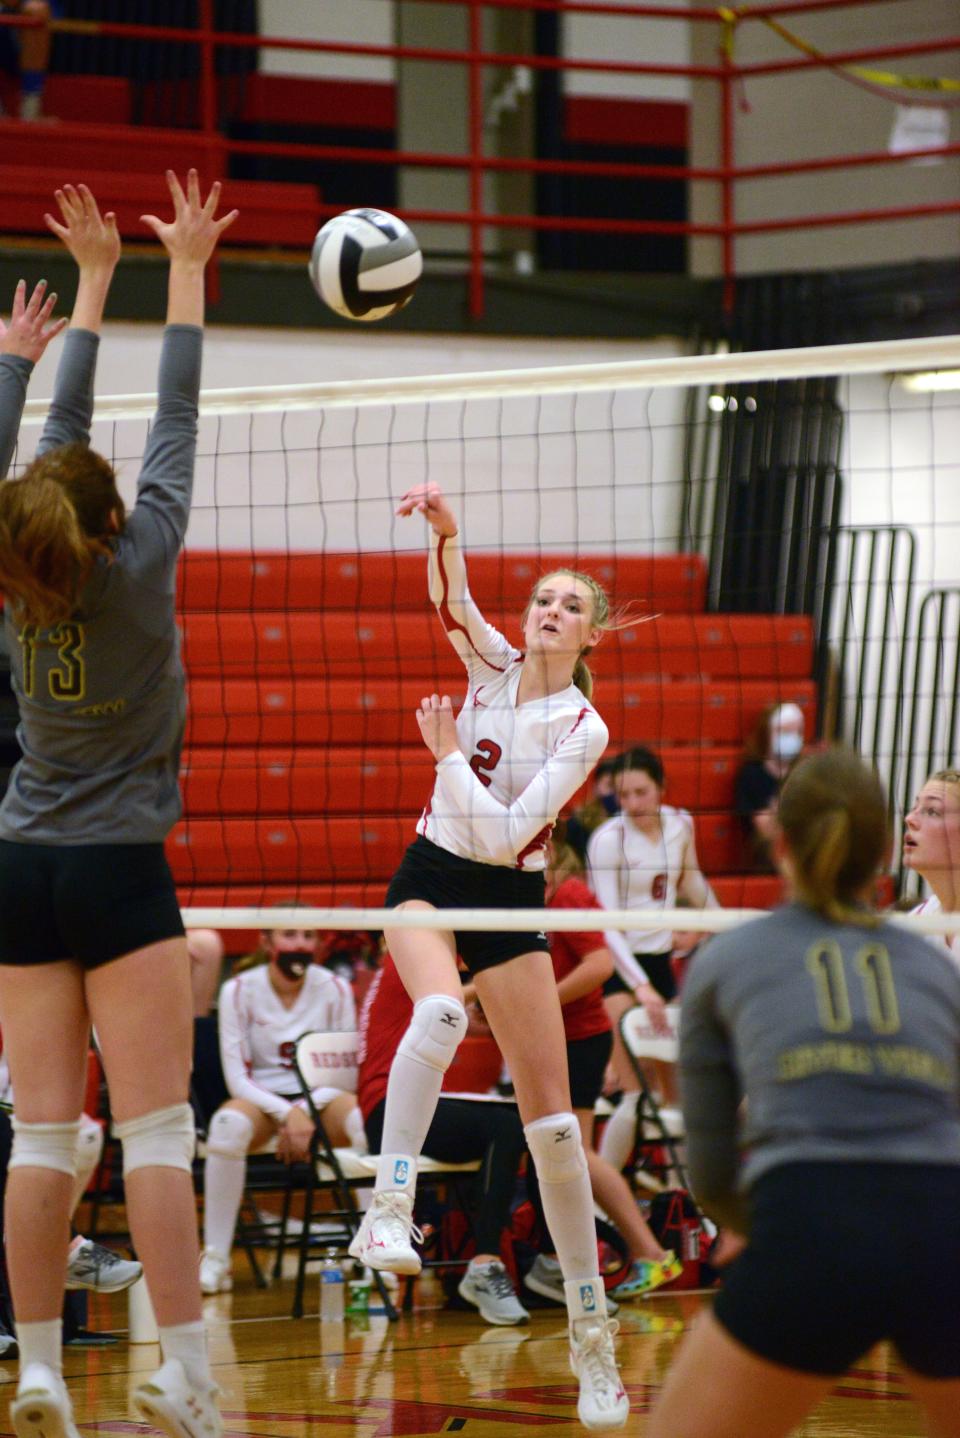 Lindsay Bryant, of Coshocton, spikes the ball against River View in a match earlier this season. Bryant will continue her volleyball career at Muskingum University.